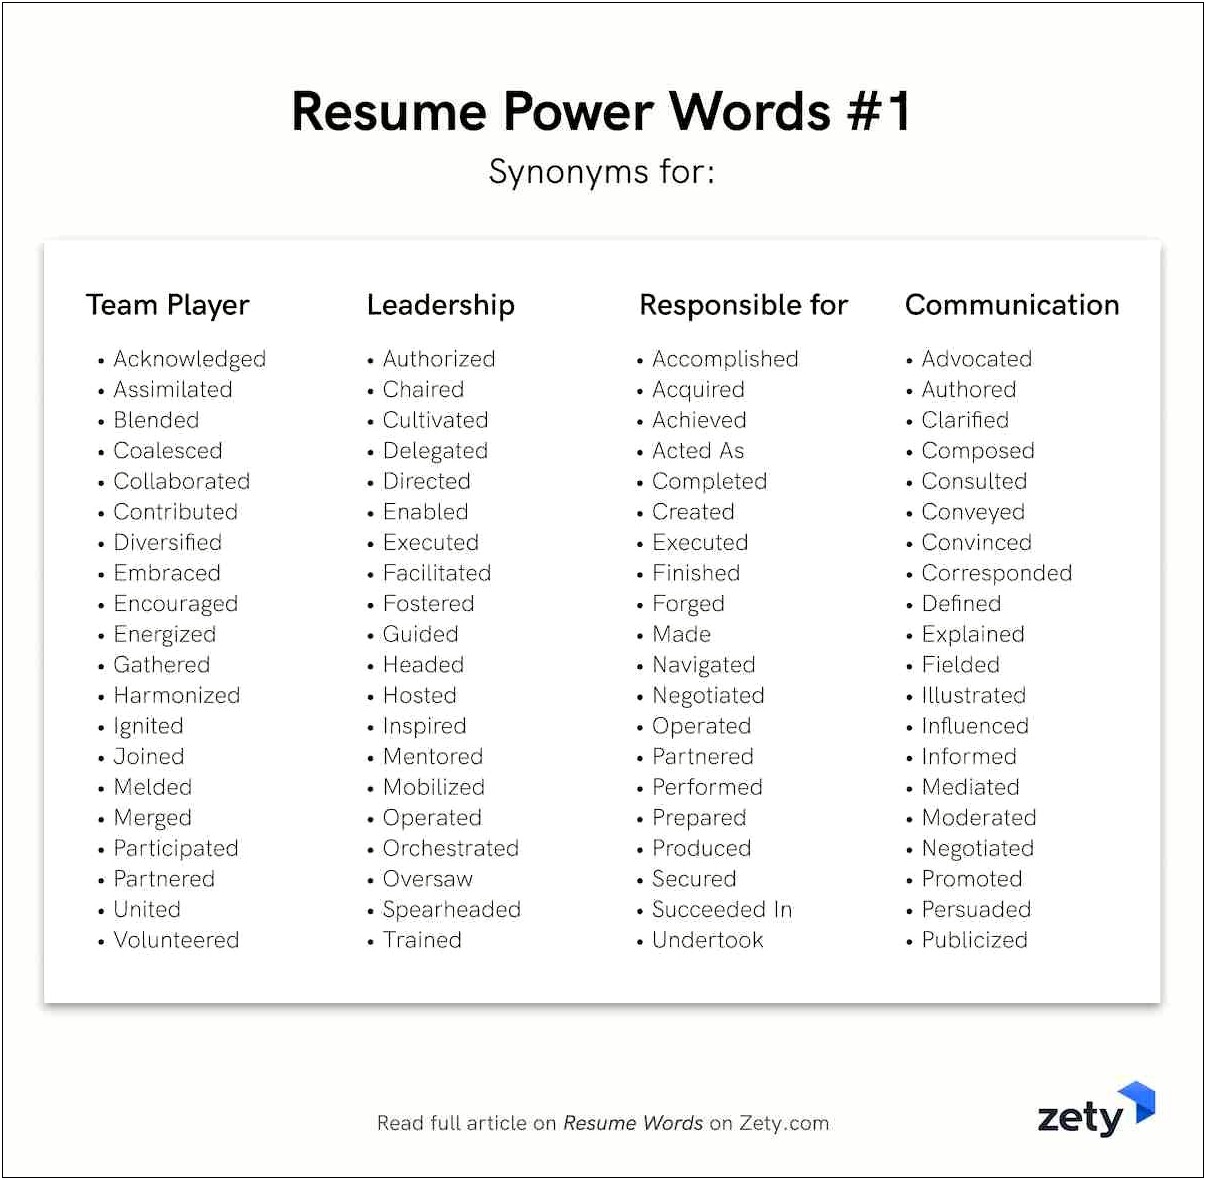 Best Verbs To Use On A Resume